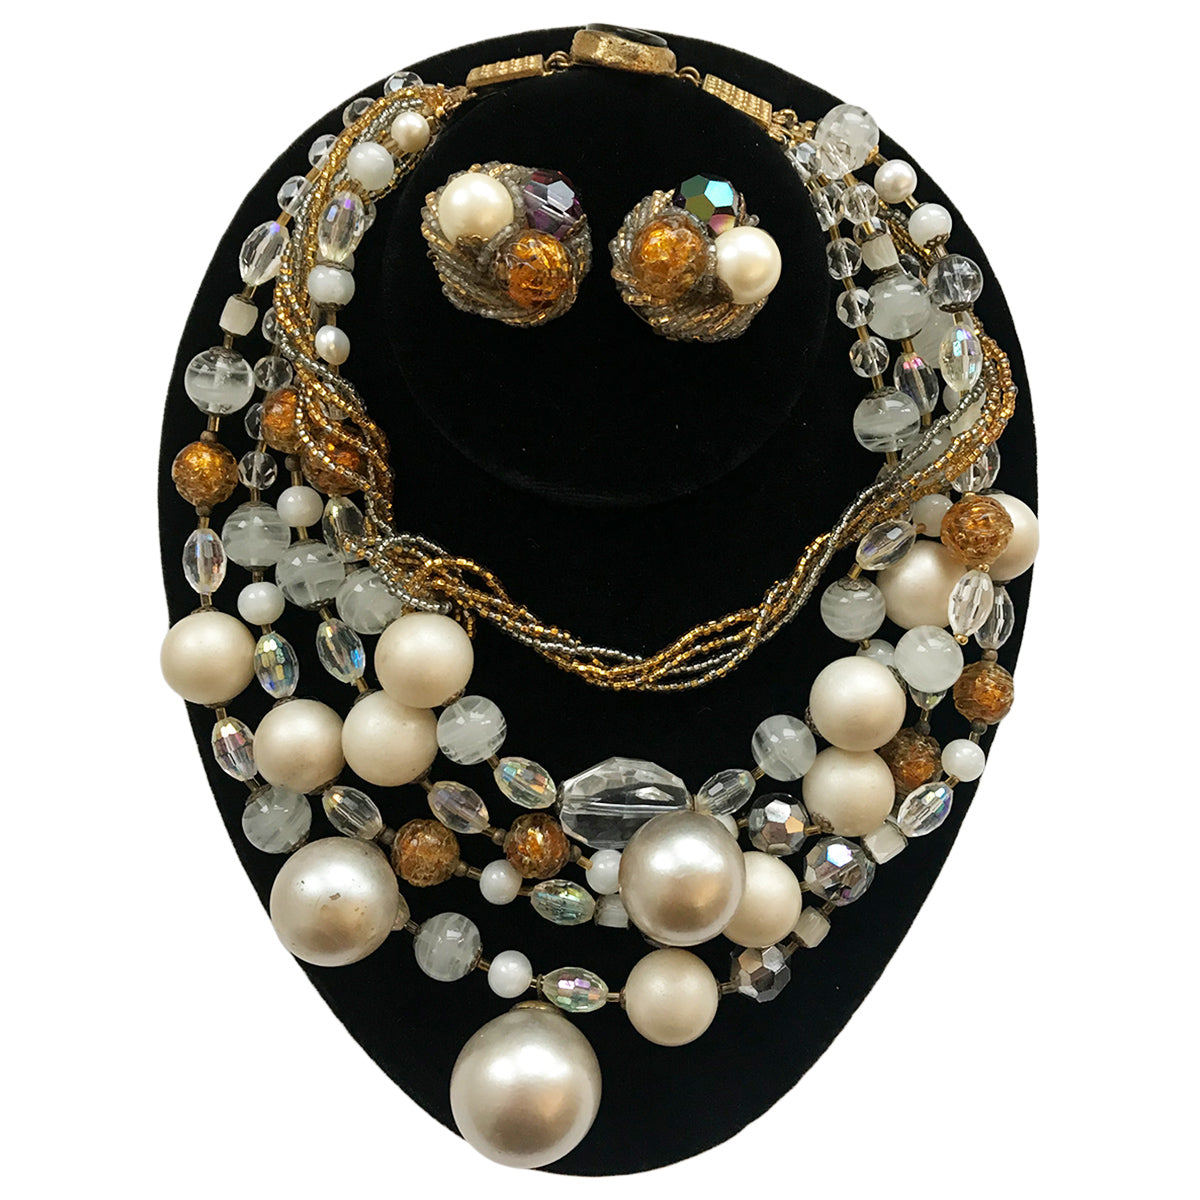 Ornello Necklace And Earrings